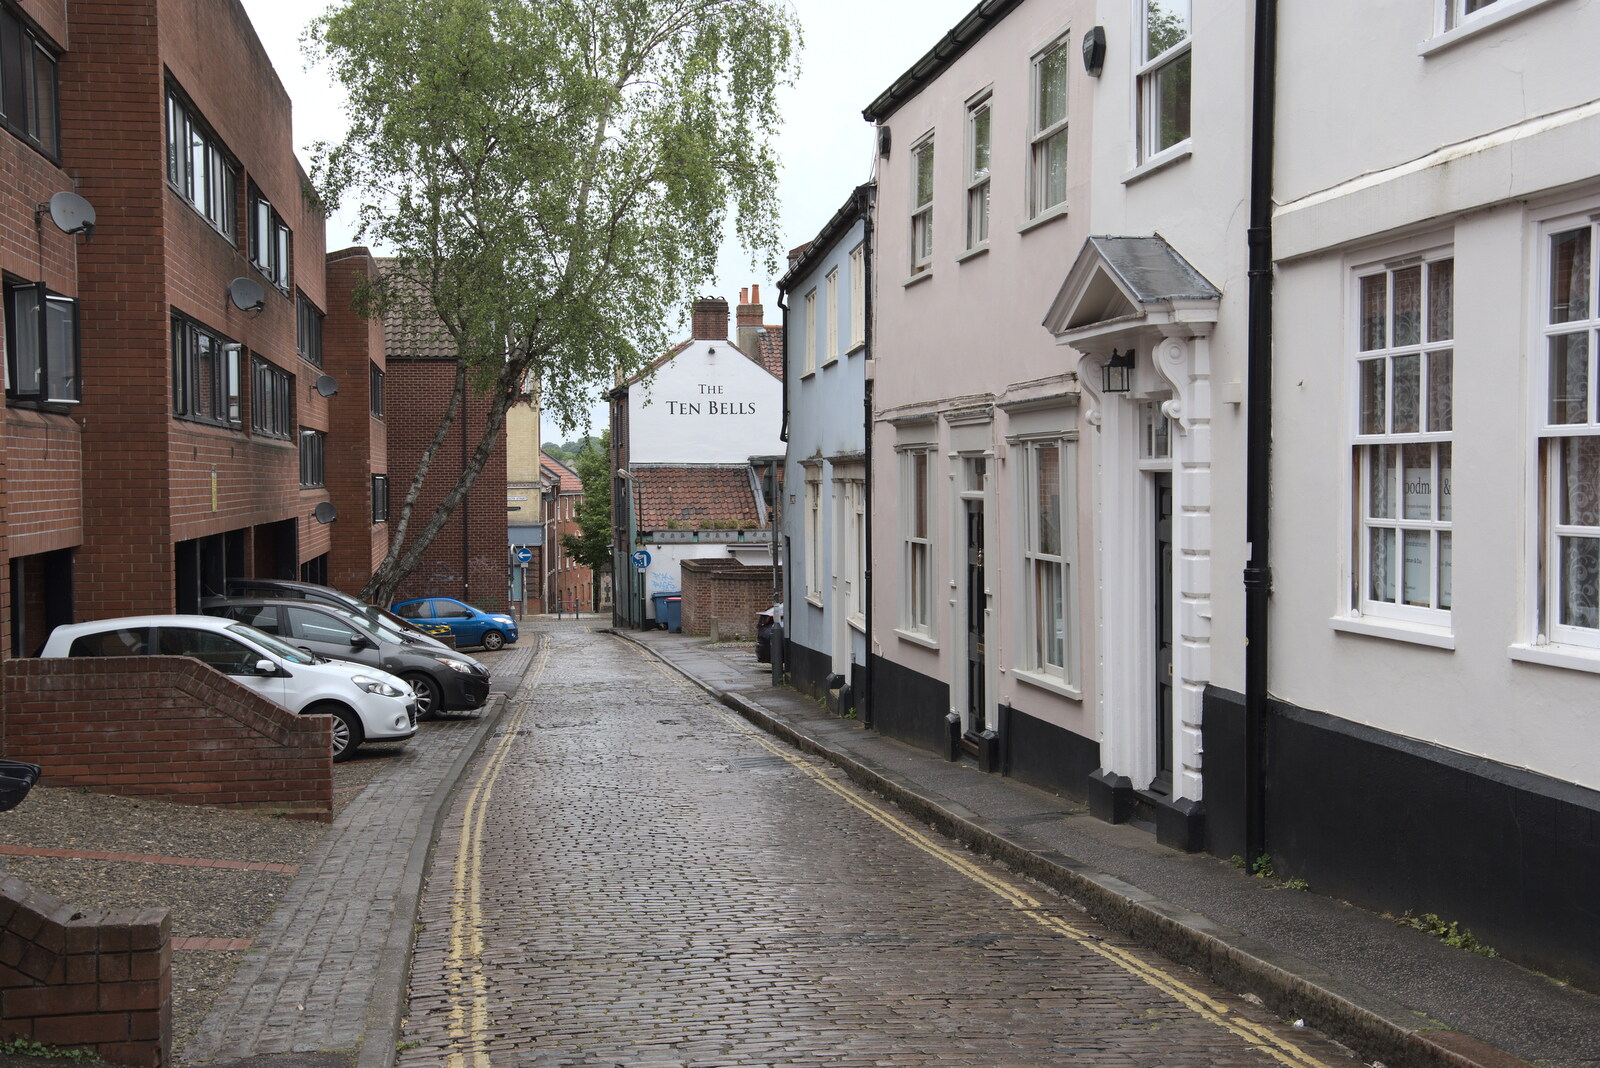 The back of the pub on Ten Bells Lane from Discovering the Hidden City: Norwich, Norfolk - 23rd May 2022